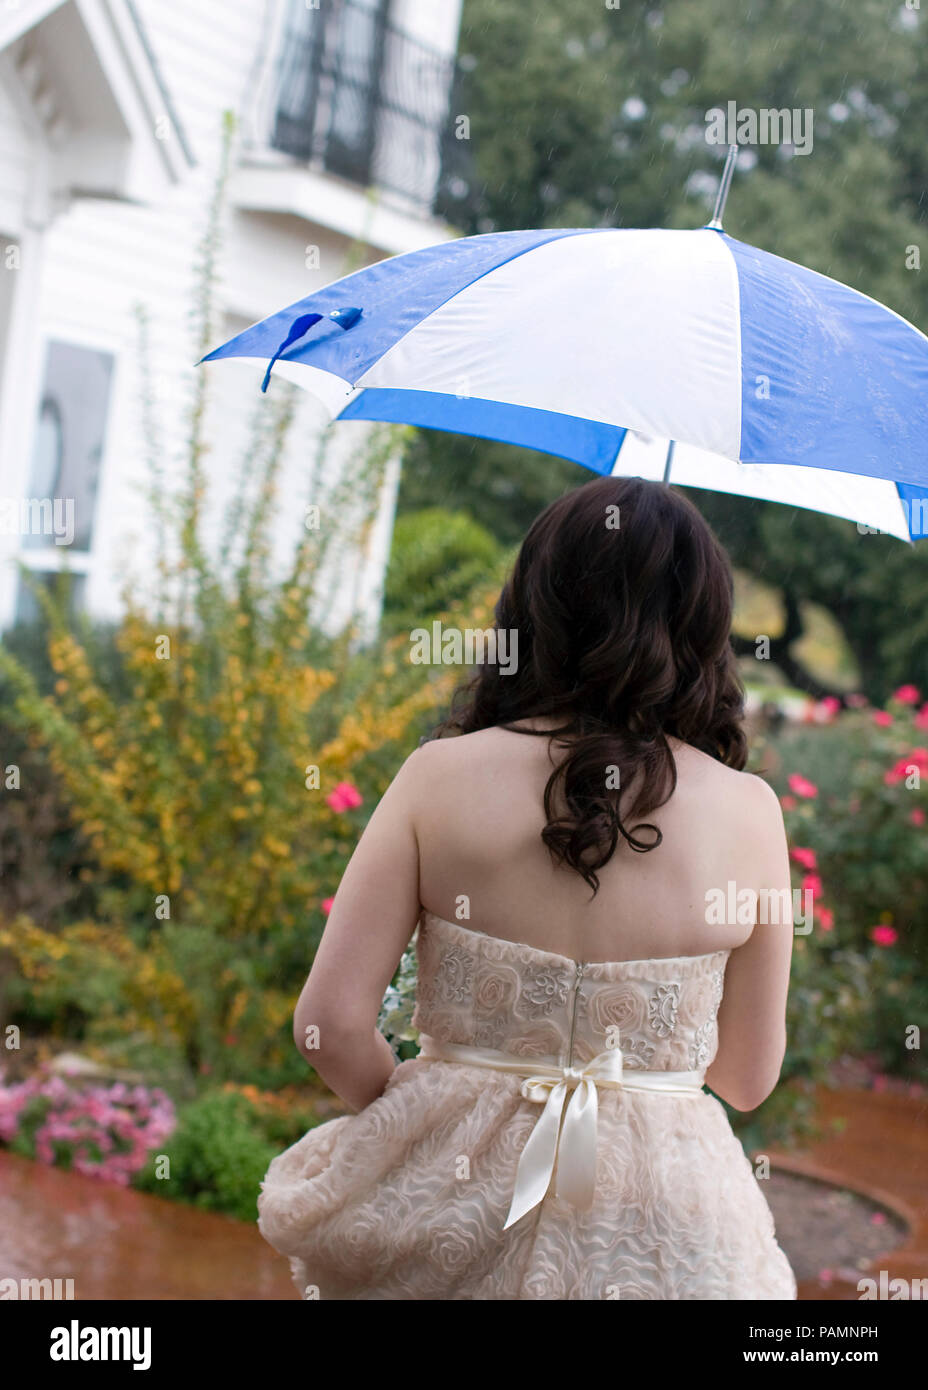 bride from back with umbrella Stock Photo